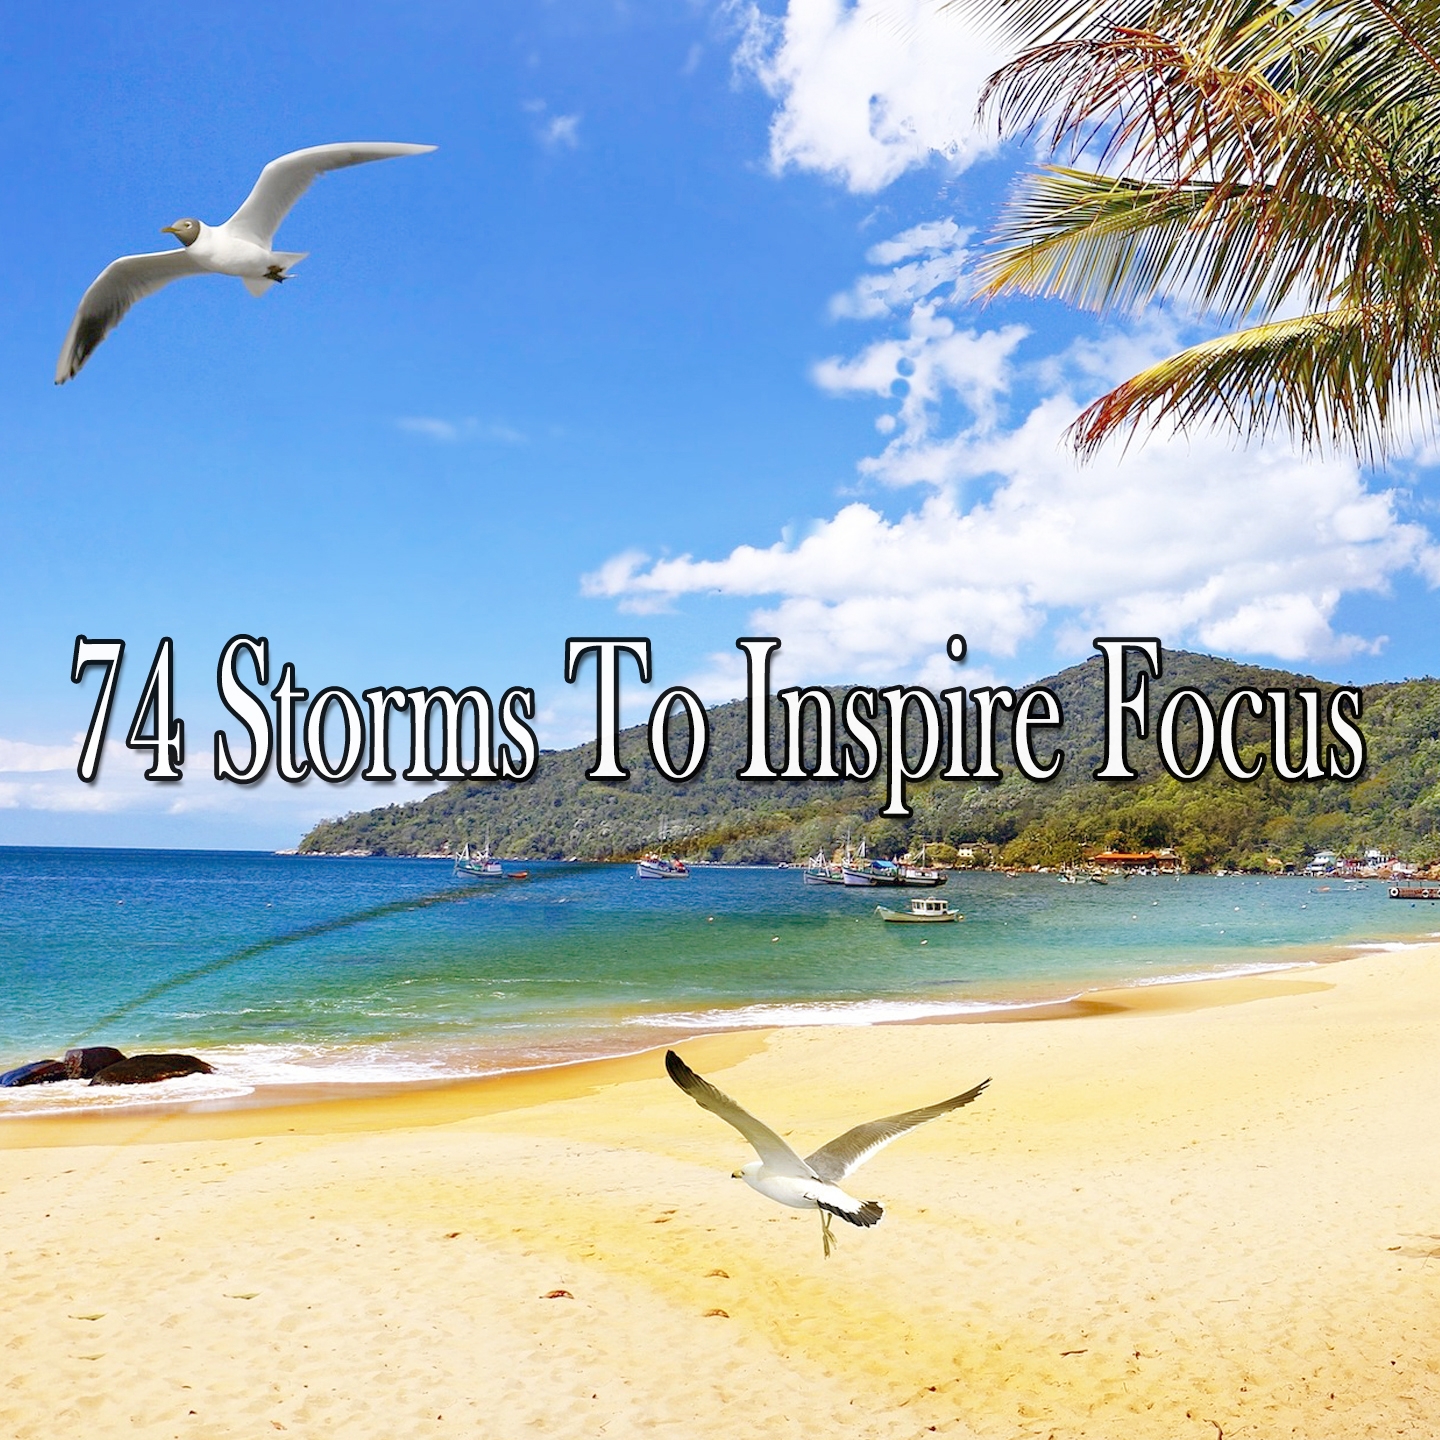 74 Storms To Inspire Focus